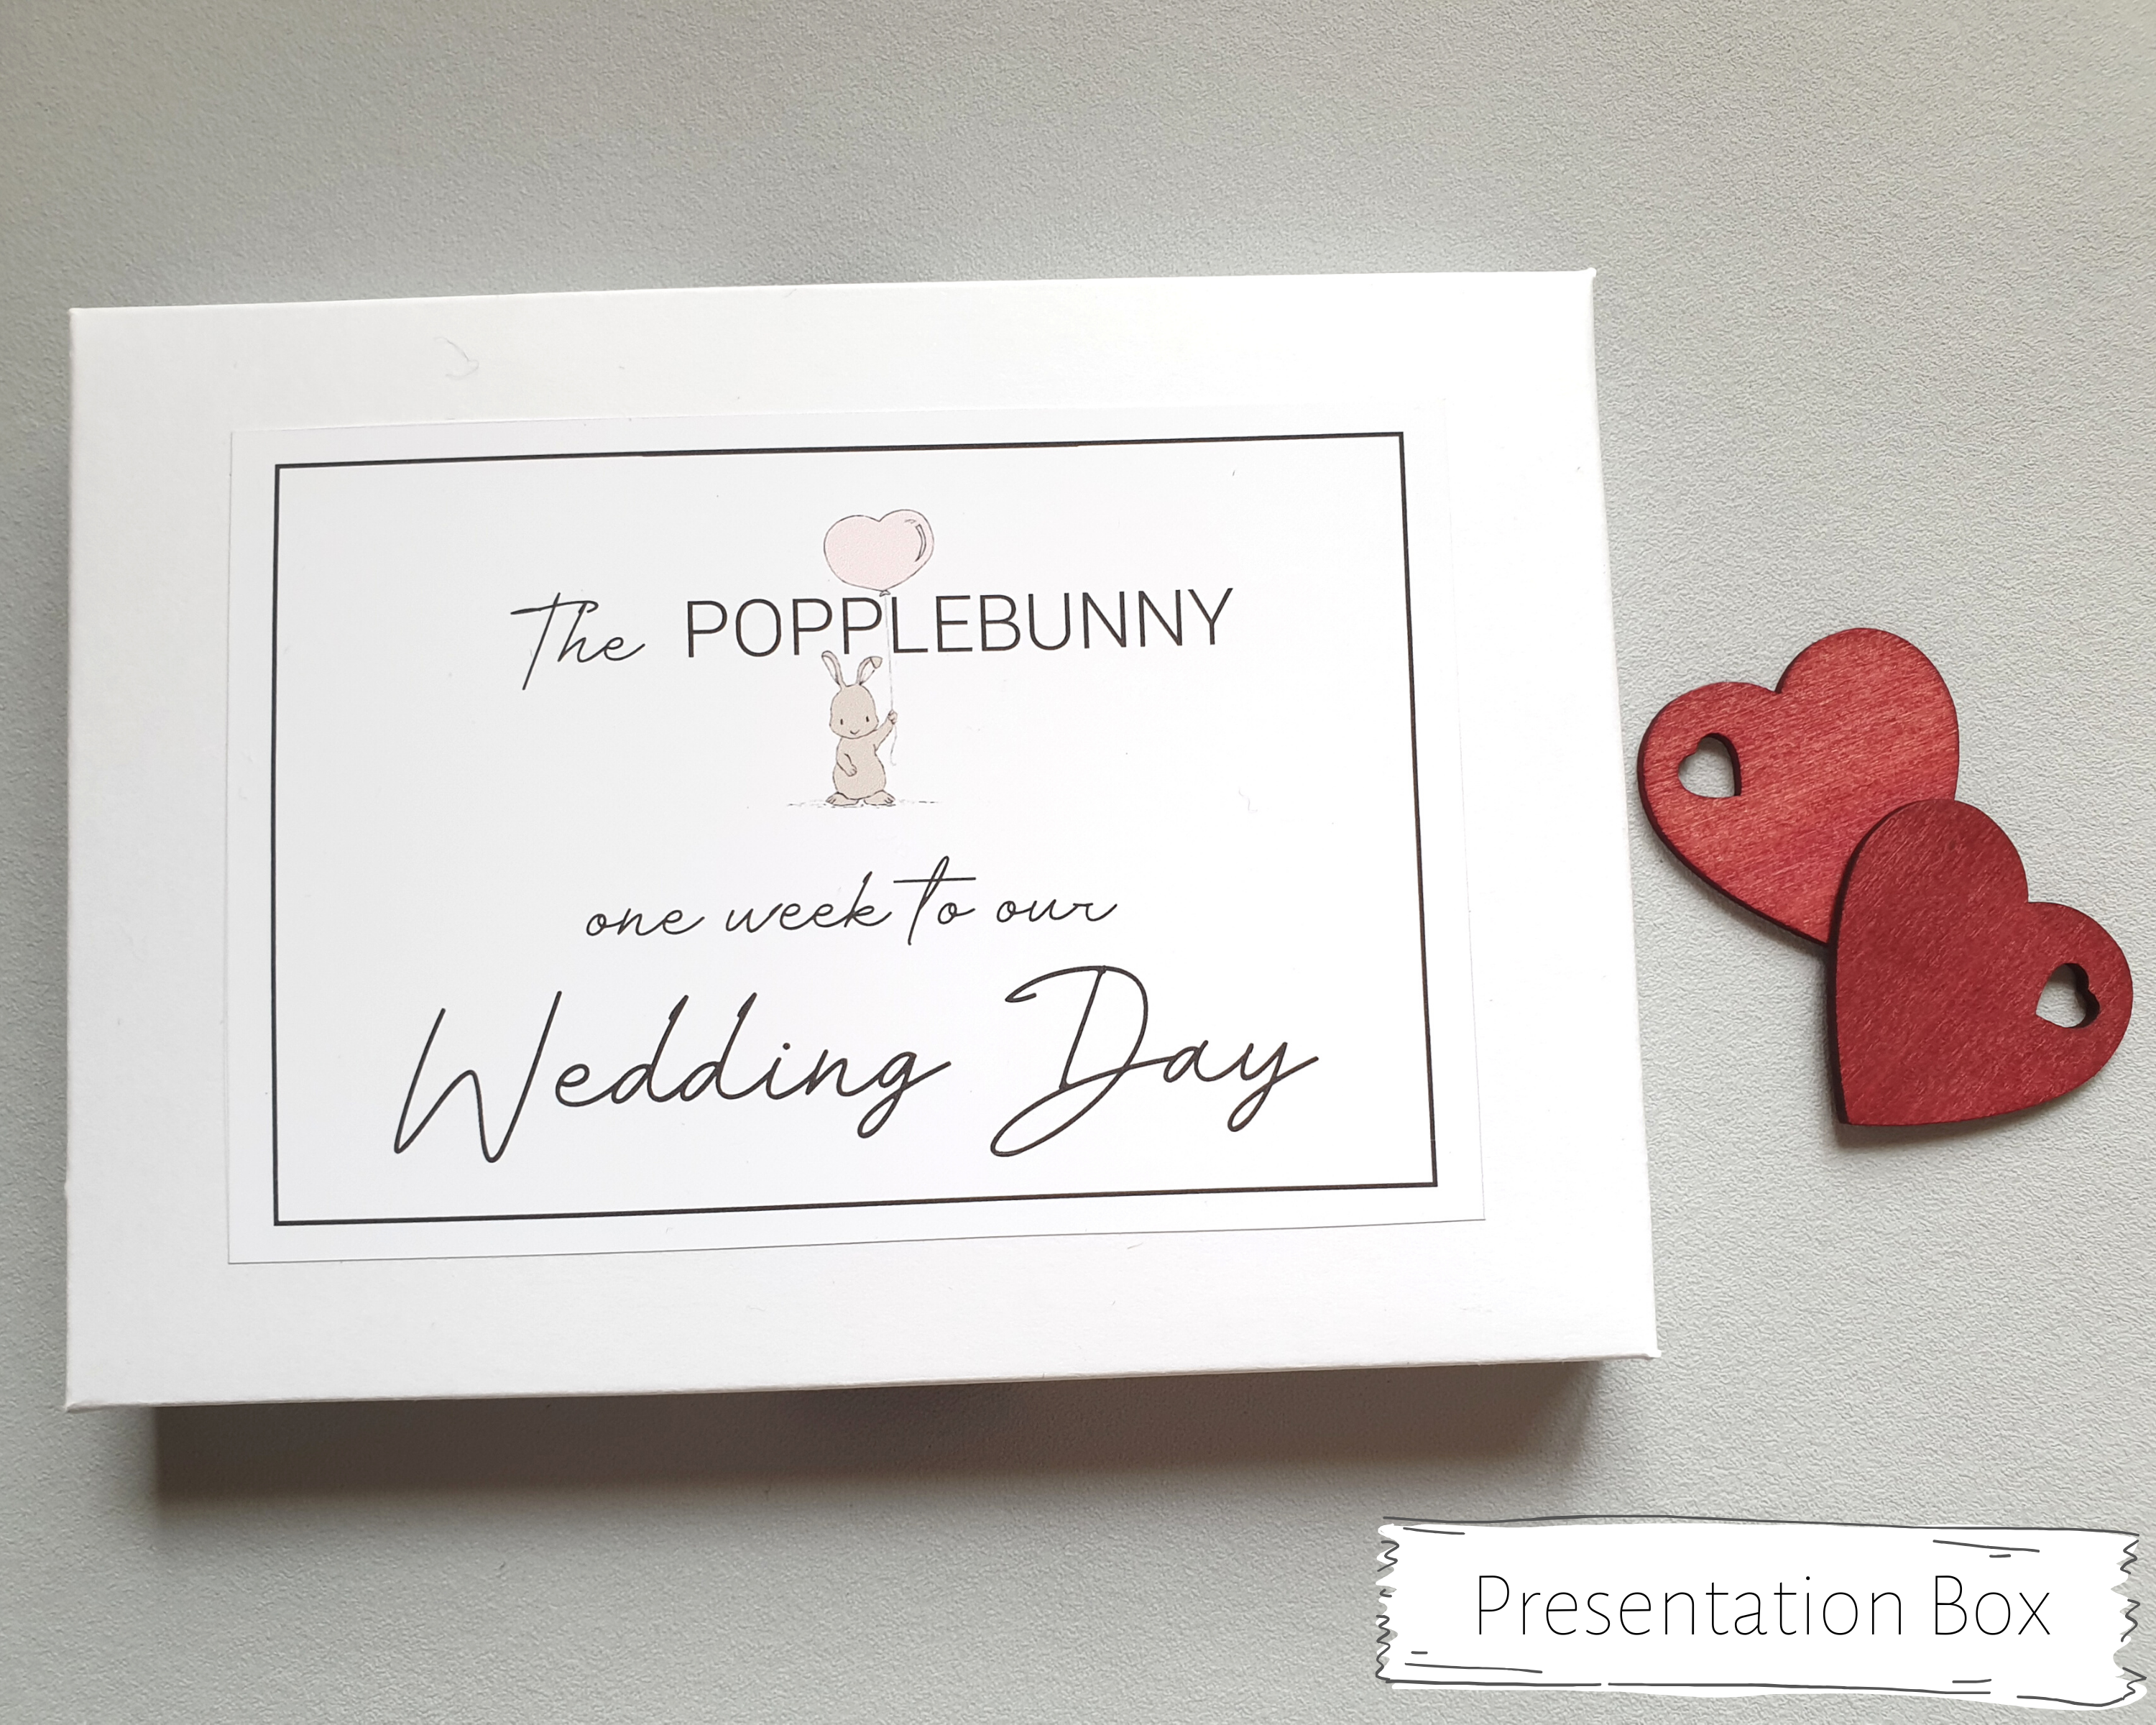 The white presentation box to keep the postcards safe with small bunny (the Popplebunny) illustration.